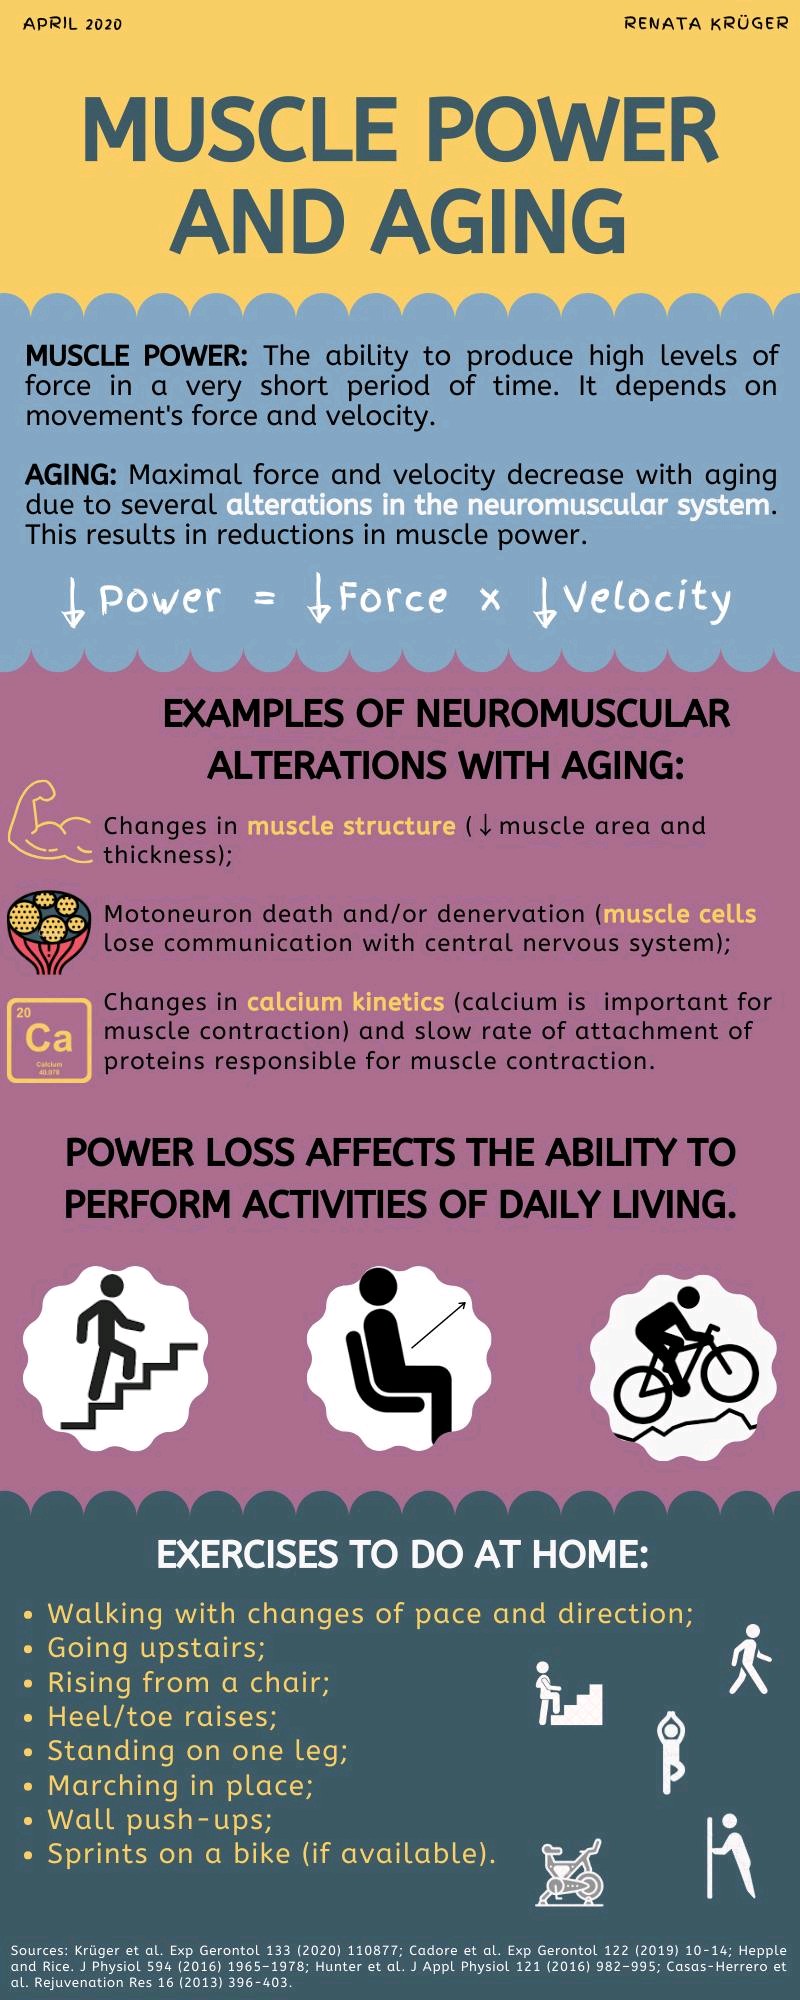 Infographic on muscle power and aging